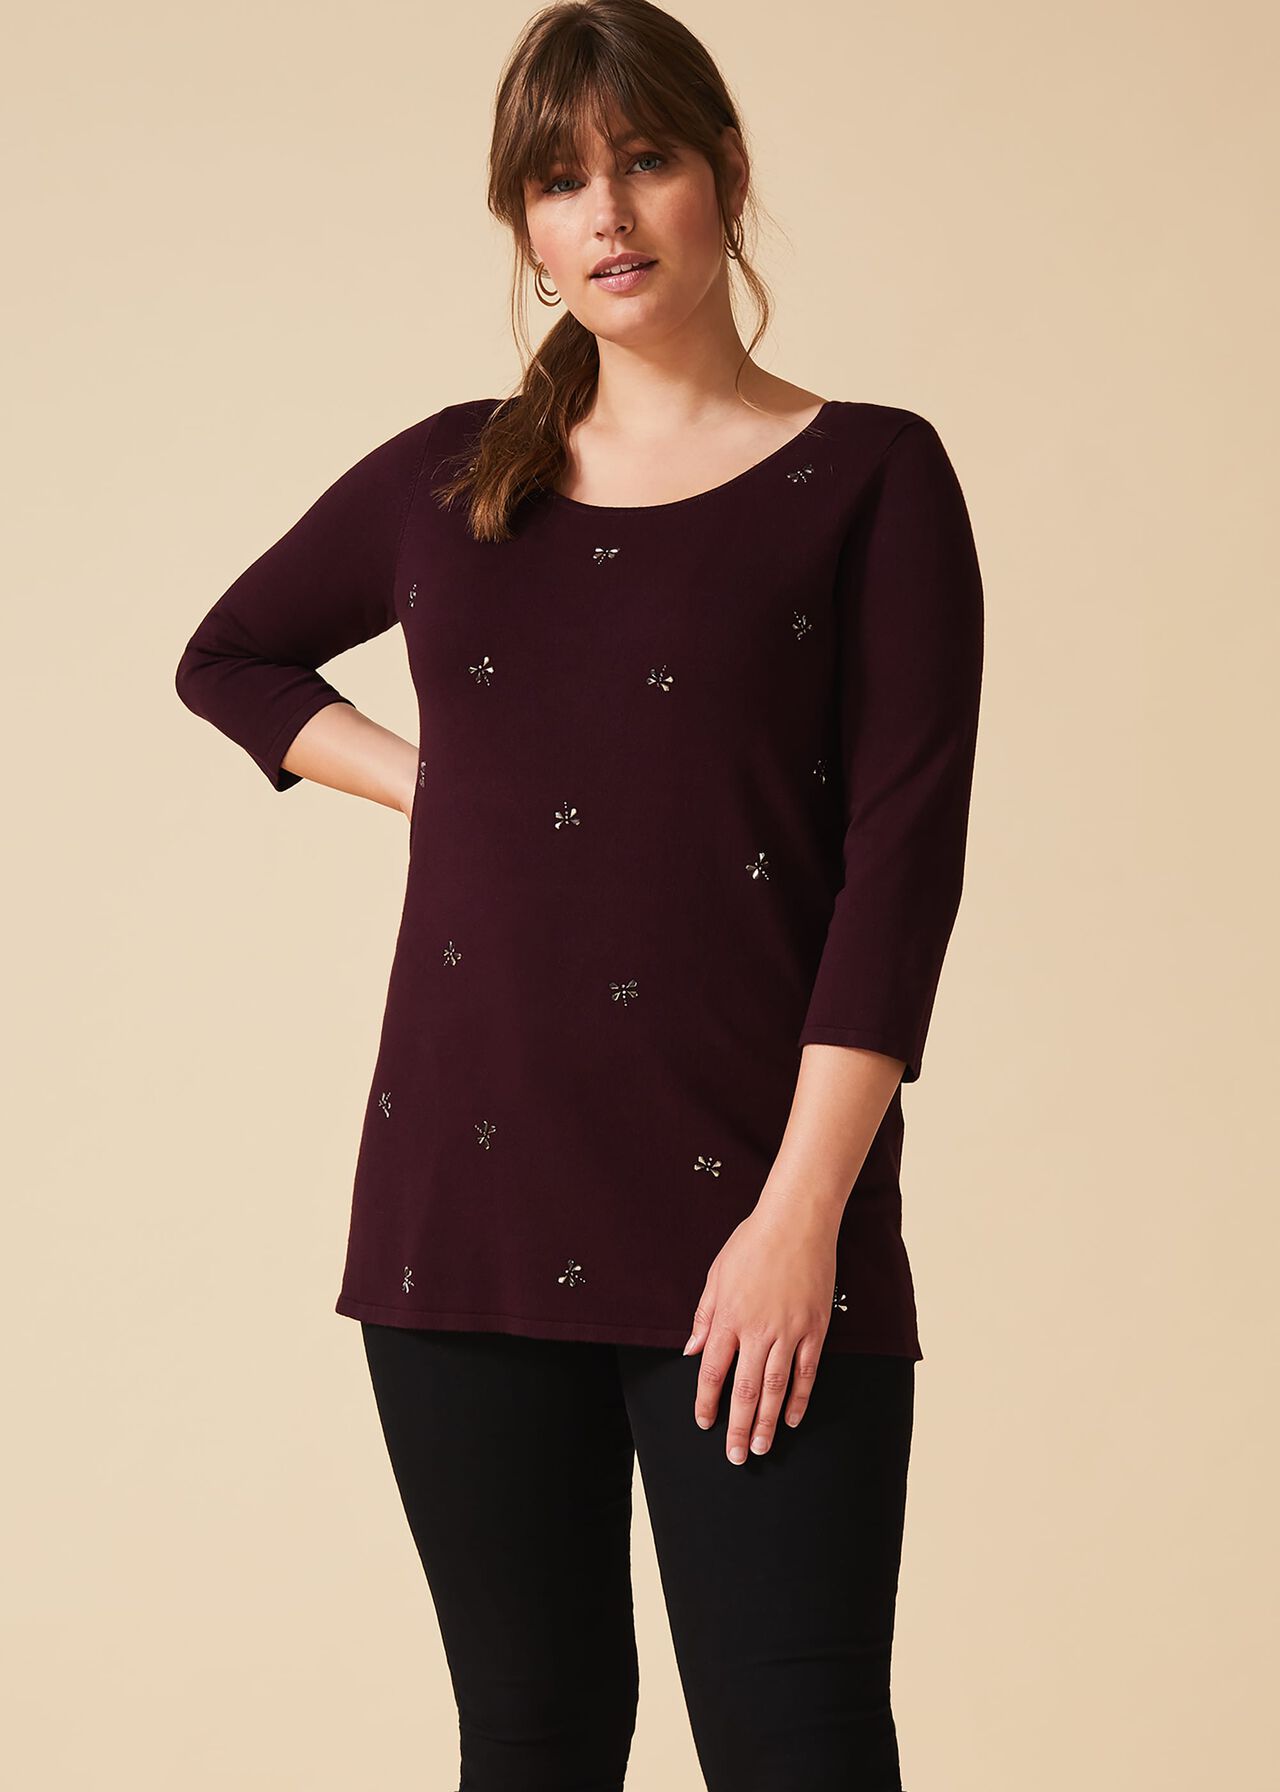 Danielle Dragonfly Knit Top